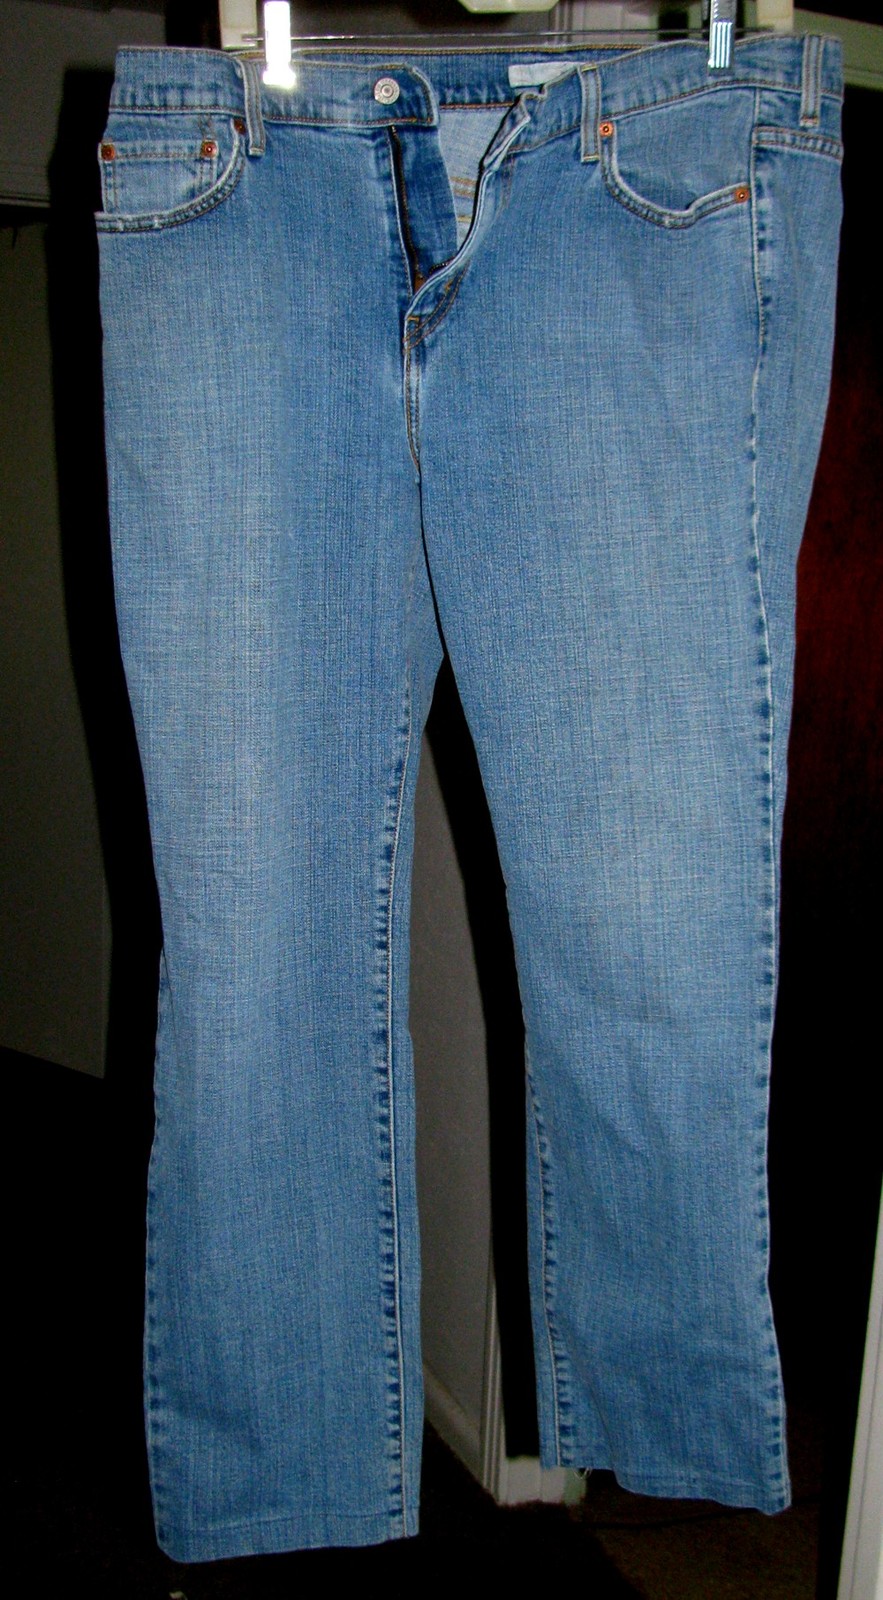 Primary image for Faded Blue Jeans Levi Straus Straight Leg 505 Size 14L